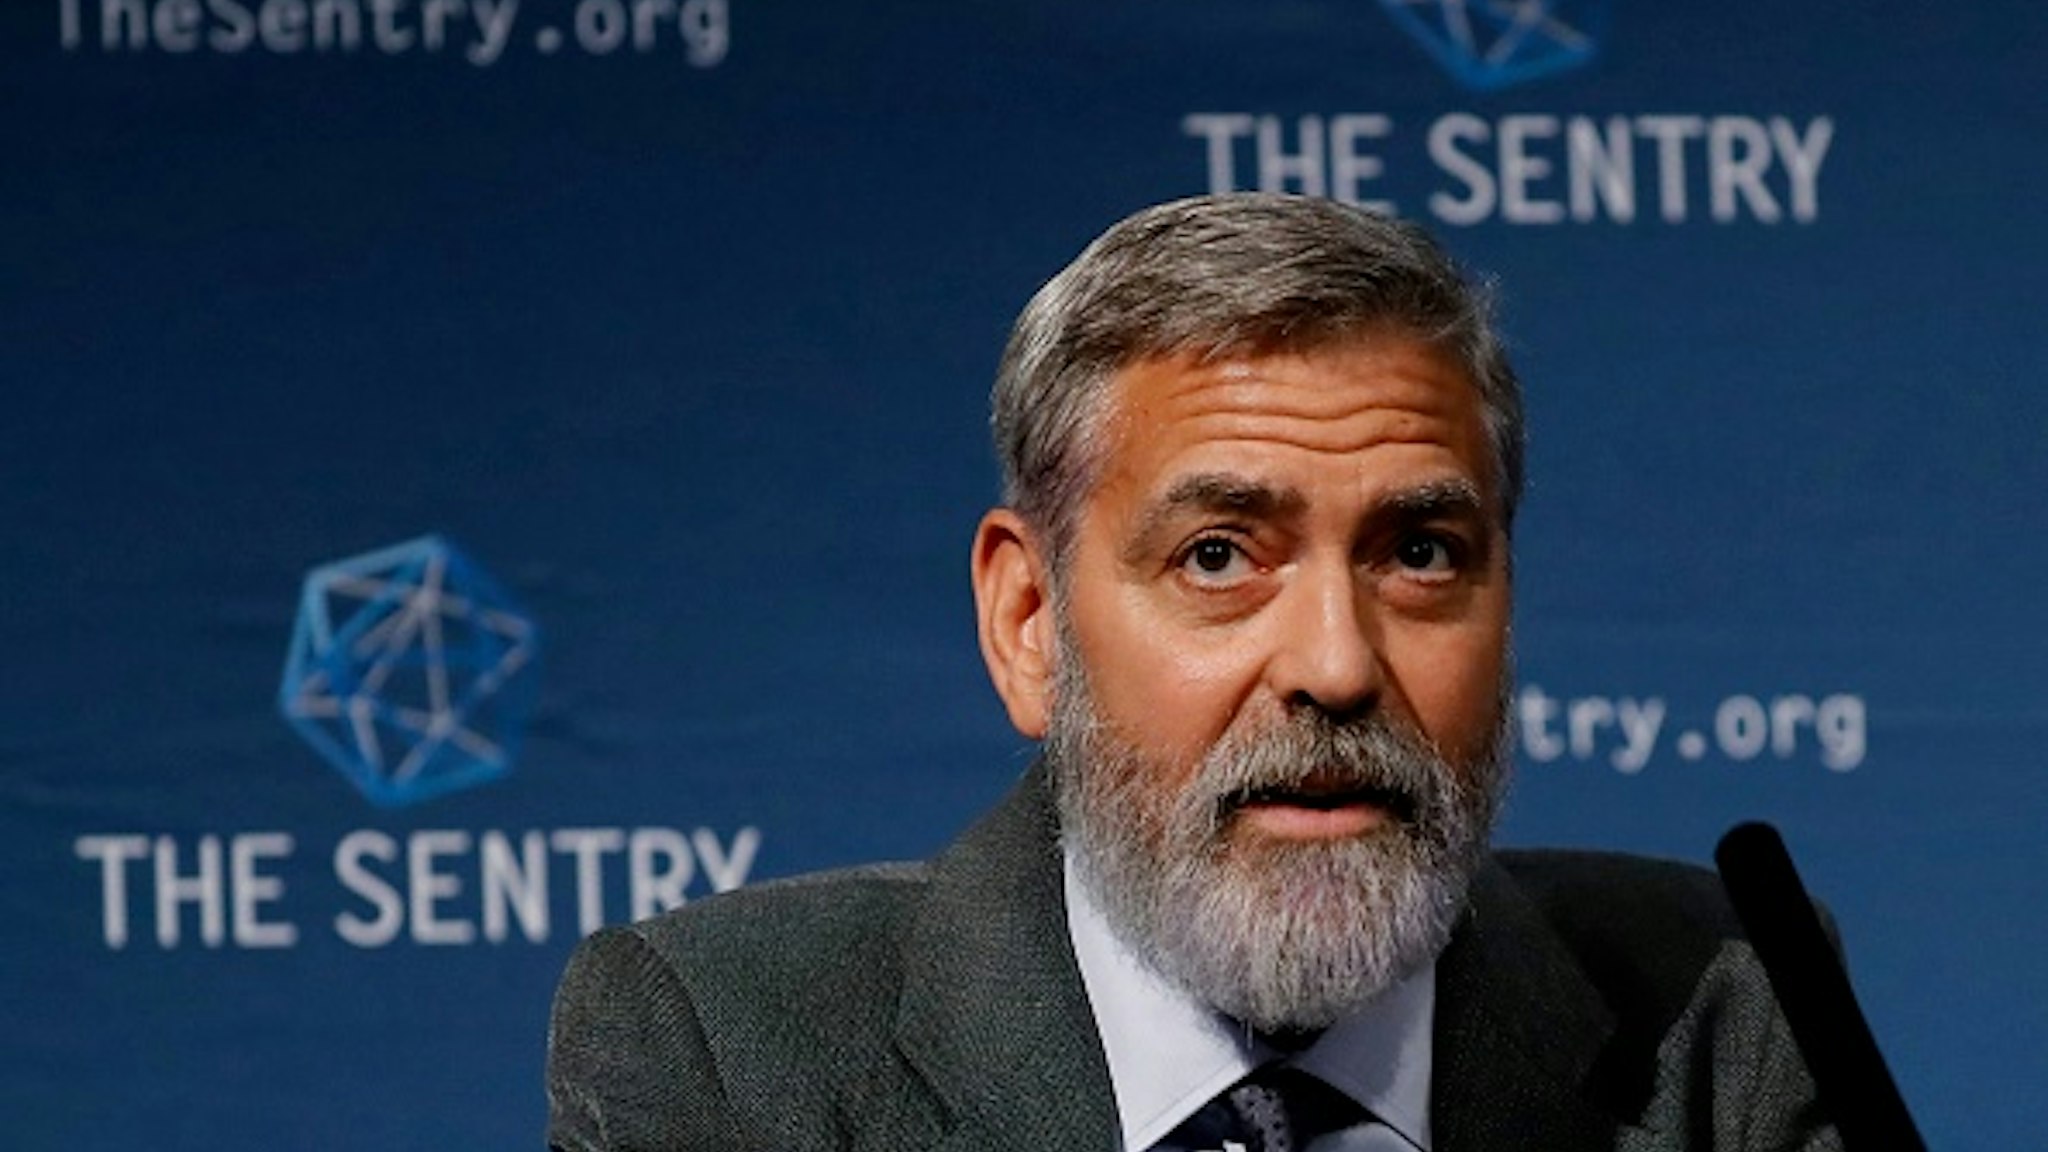 US actor George Clooney takes part in a press conference in central London to present a report on atrocities in South Sudan on September 19, 2019.